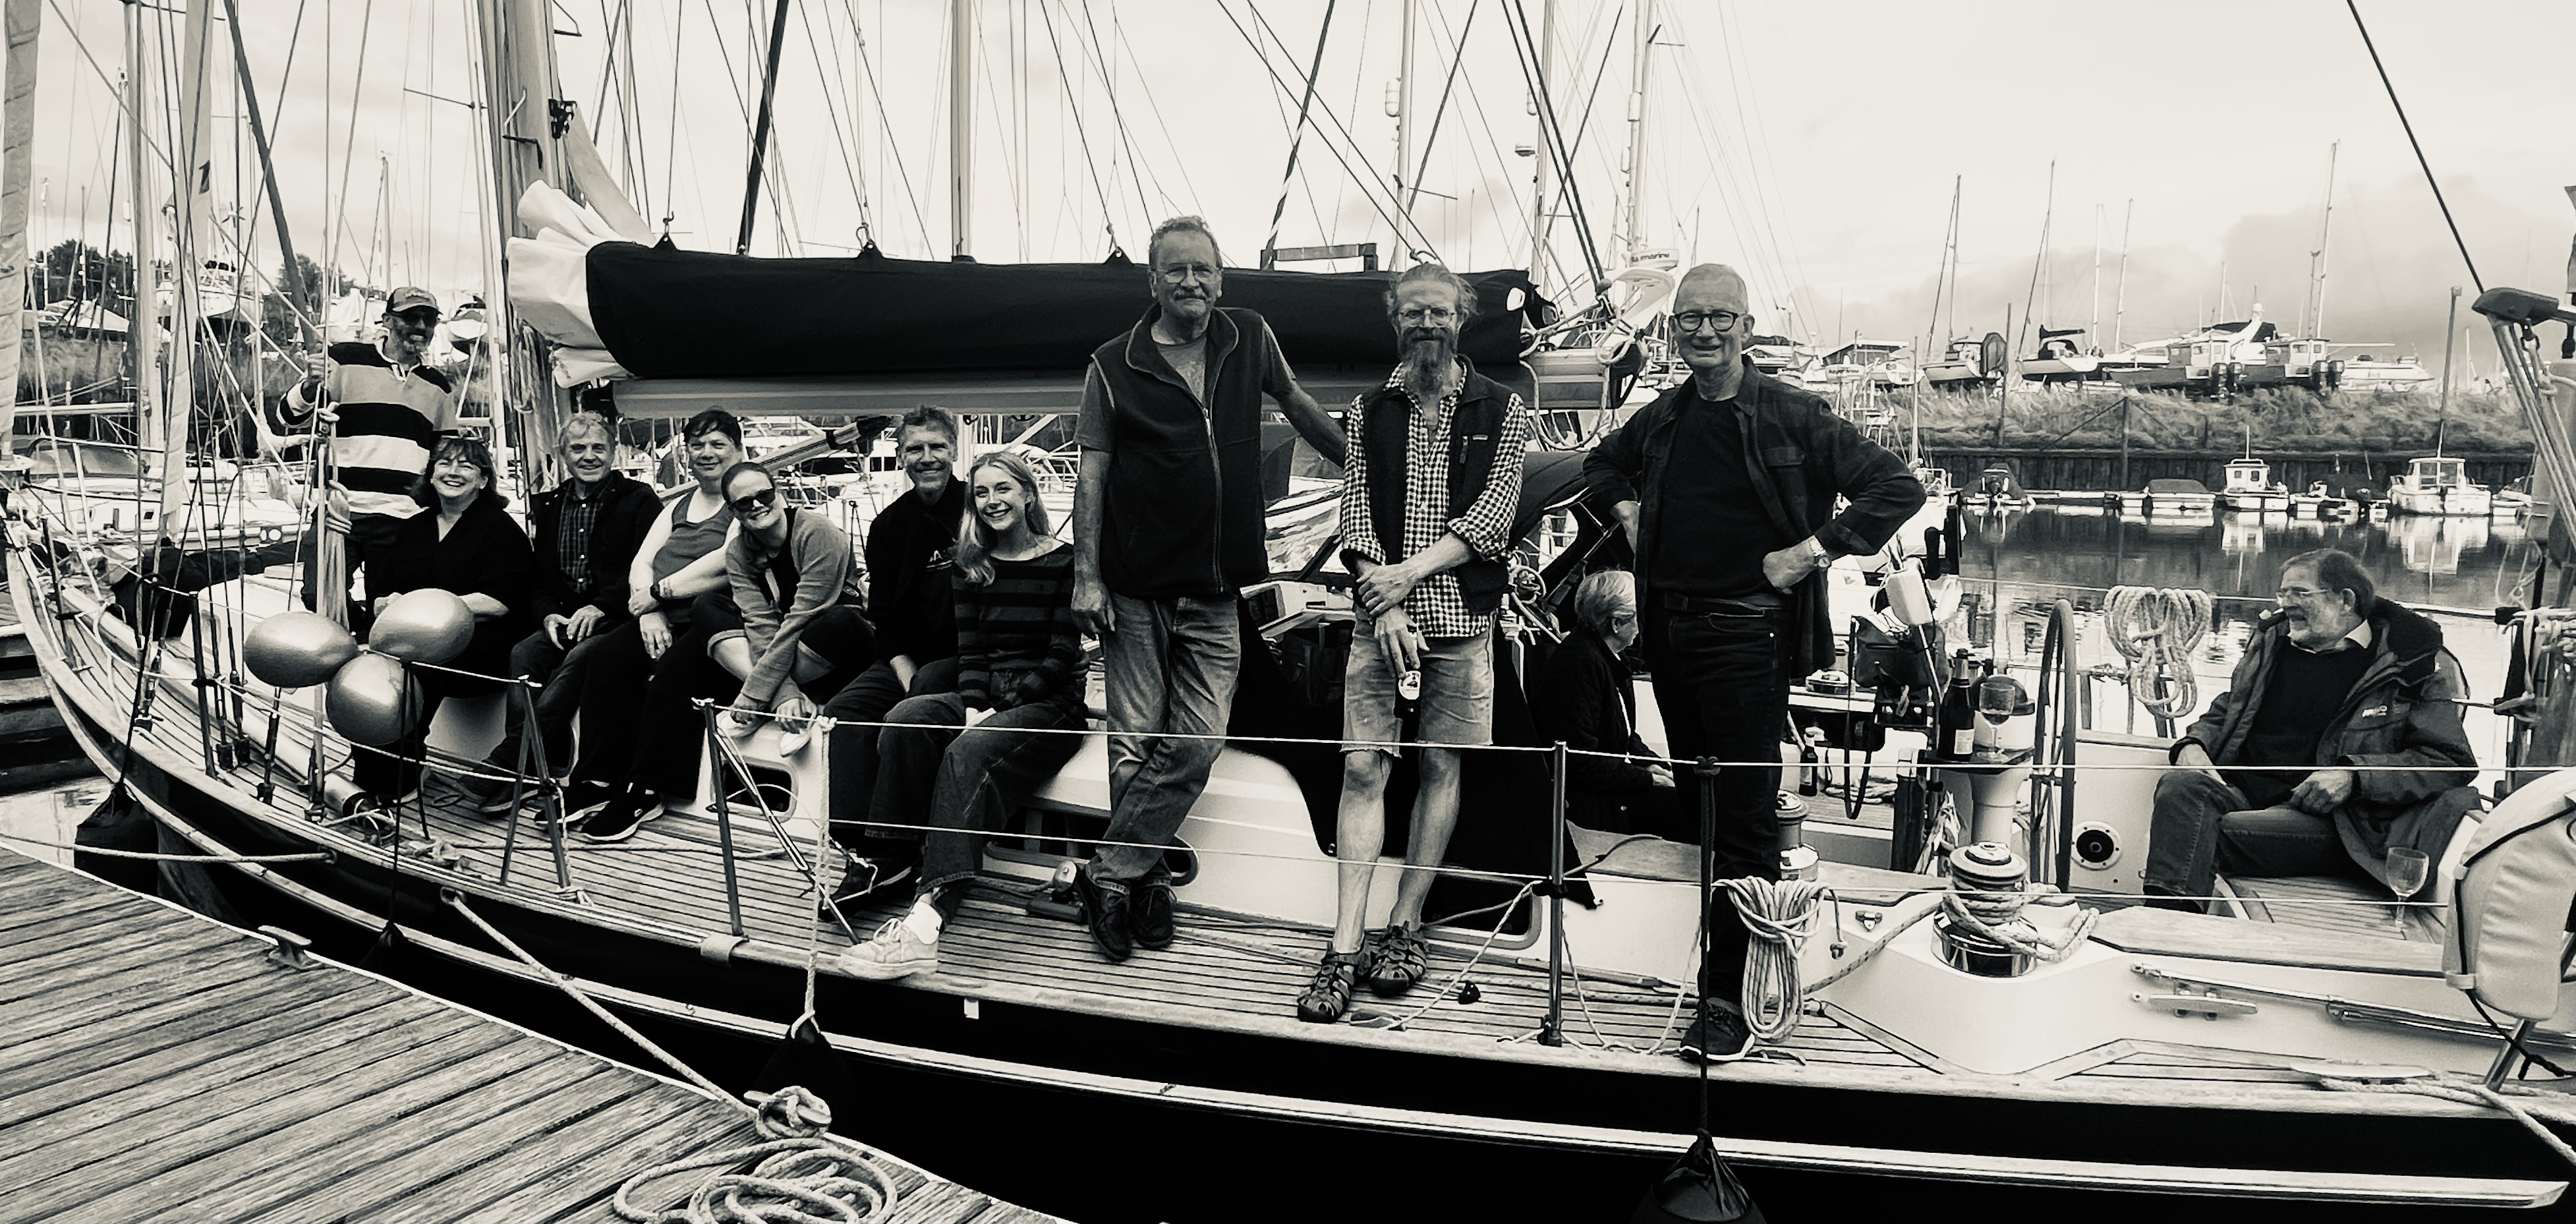 Crew (left to right): Mark Sampson, Mary, John Vass, Renée Mineart, Michelle Bowden, Me, Emma, Chris Sutherland, Kevin Warren, Liz Mapplebeck, Mike Smithson, Phil Bays (Ben's Dad). Photographer: Andrea Bays. Crew unable to join us in order of their joining the boat: Ben, Glen and George. 